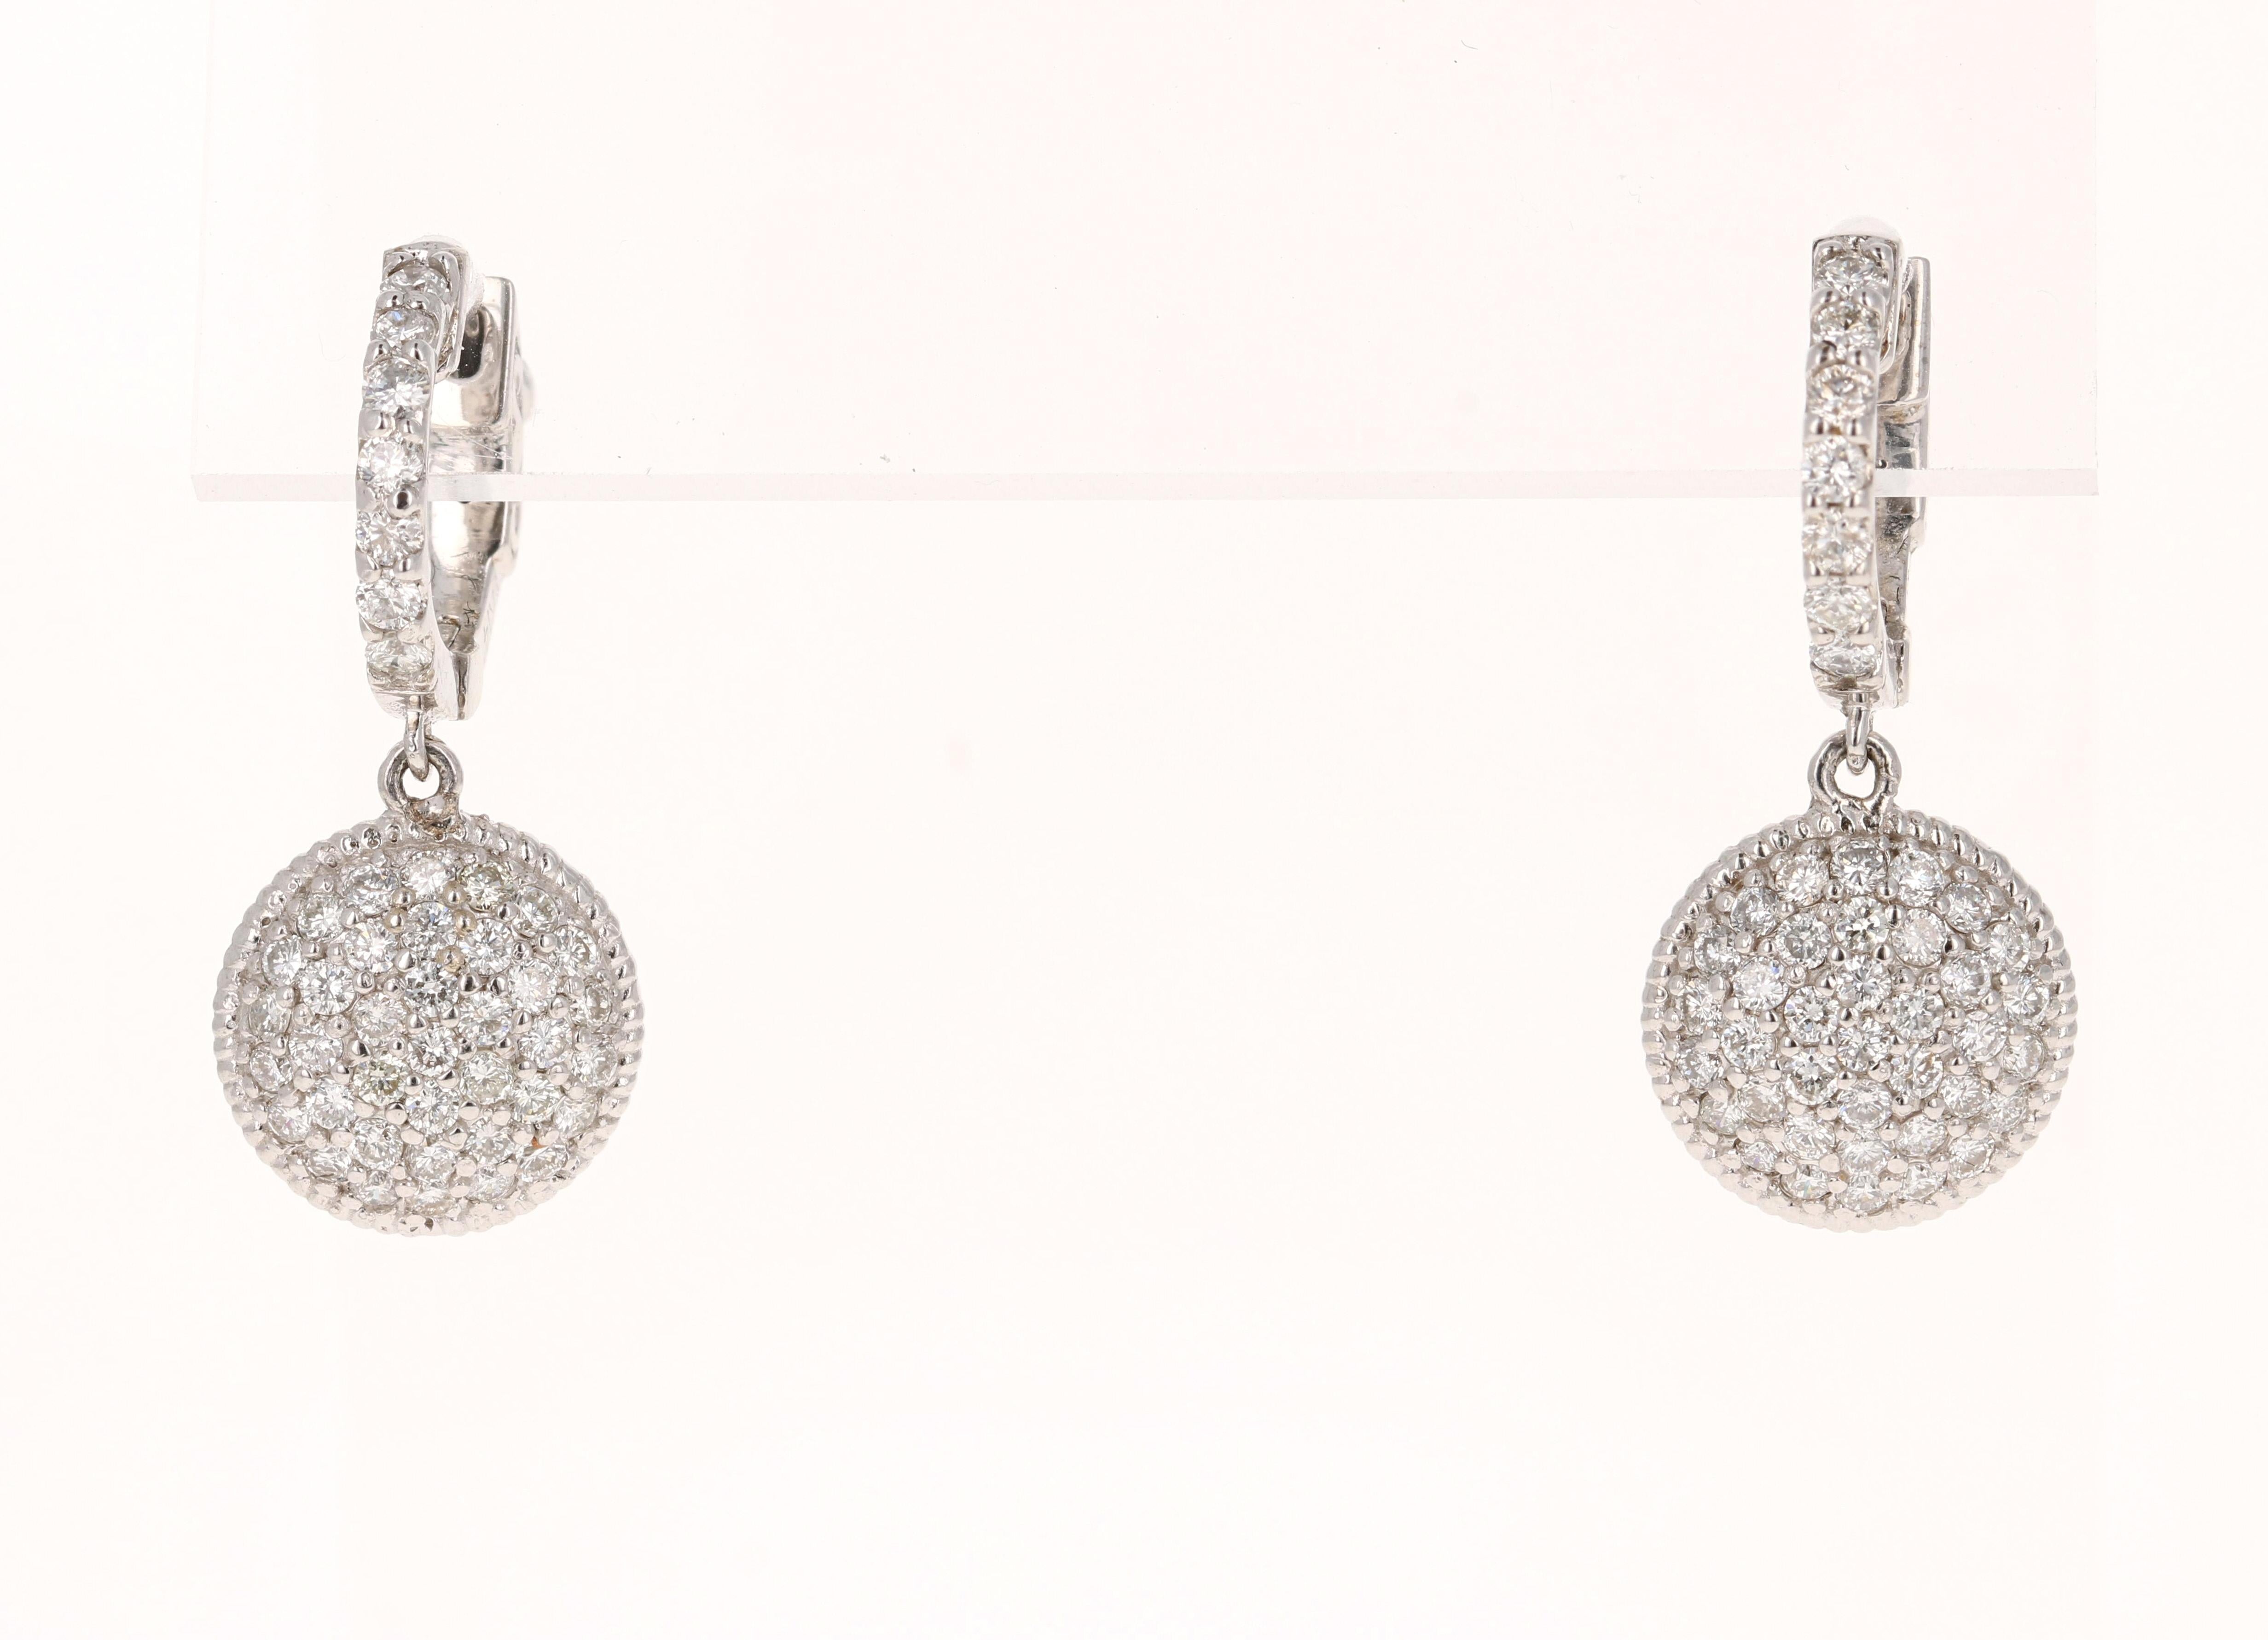 86 Round Cut Diamonds that weigh 1.25 Carats (Clarity: VS2/Color: F).  

Made in 14K White Gold weighing approximately 5.0 grams.  

They are about 1 inch in length (2.5cm) with a lever-back closure for ease of wearing and safety.